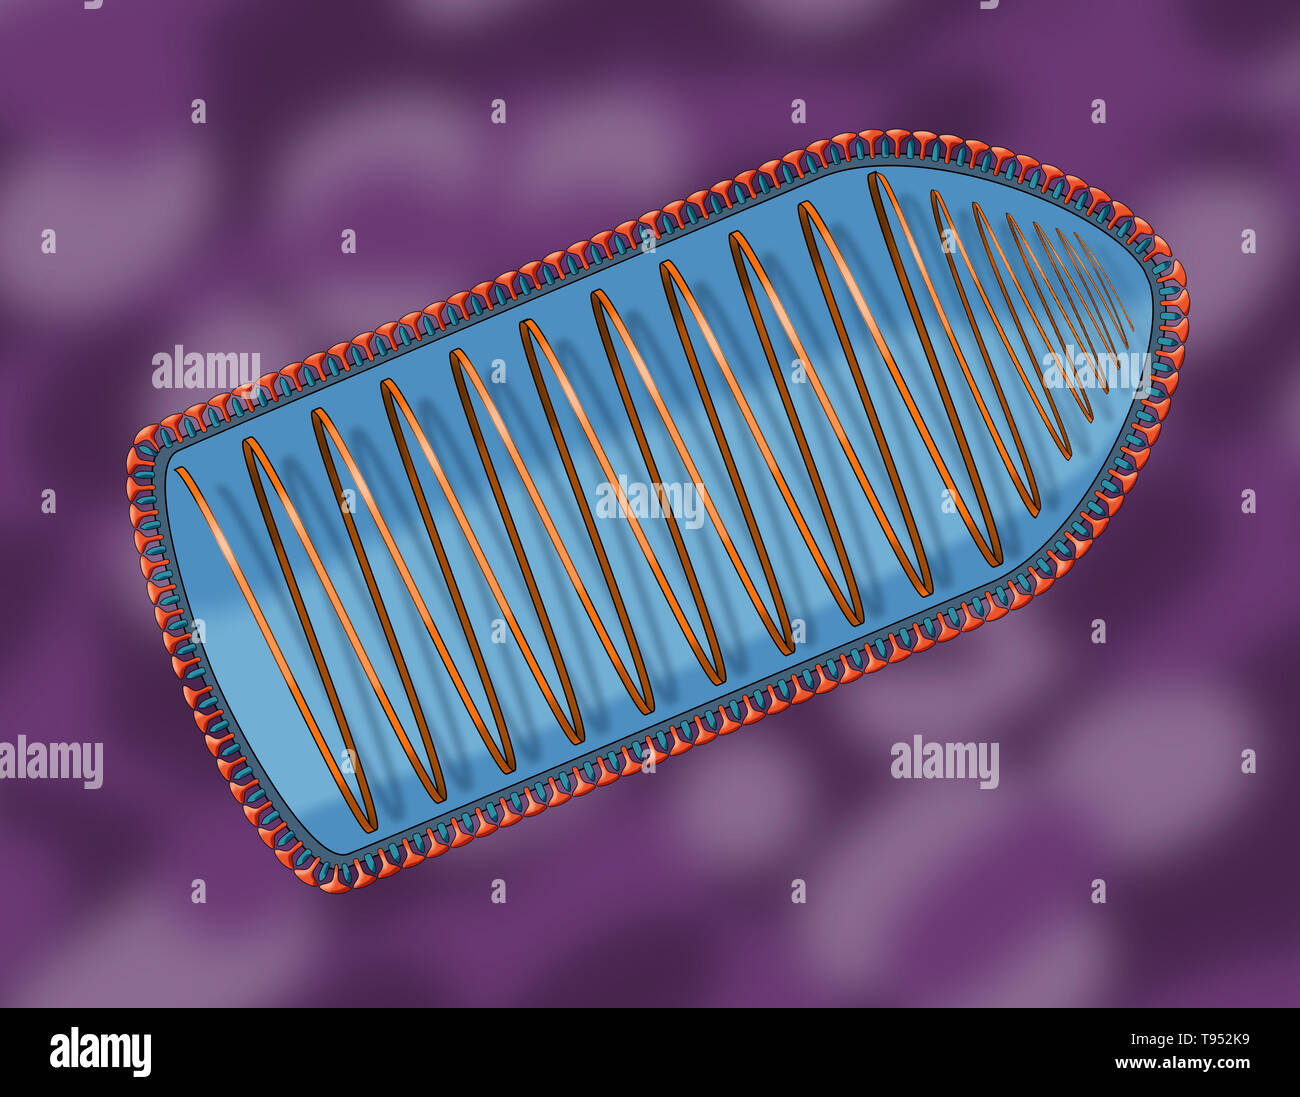 Illustration showing the internal structure of the rabies virus. Rabies virus is a neurotropic virus that causes rabies in humans and animals. The rabies virus has a cylindrical morphology and is the type species of the Lyssavirus genus of the Rhabdoviridae family. Stock Photo